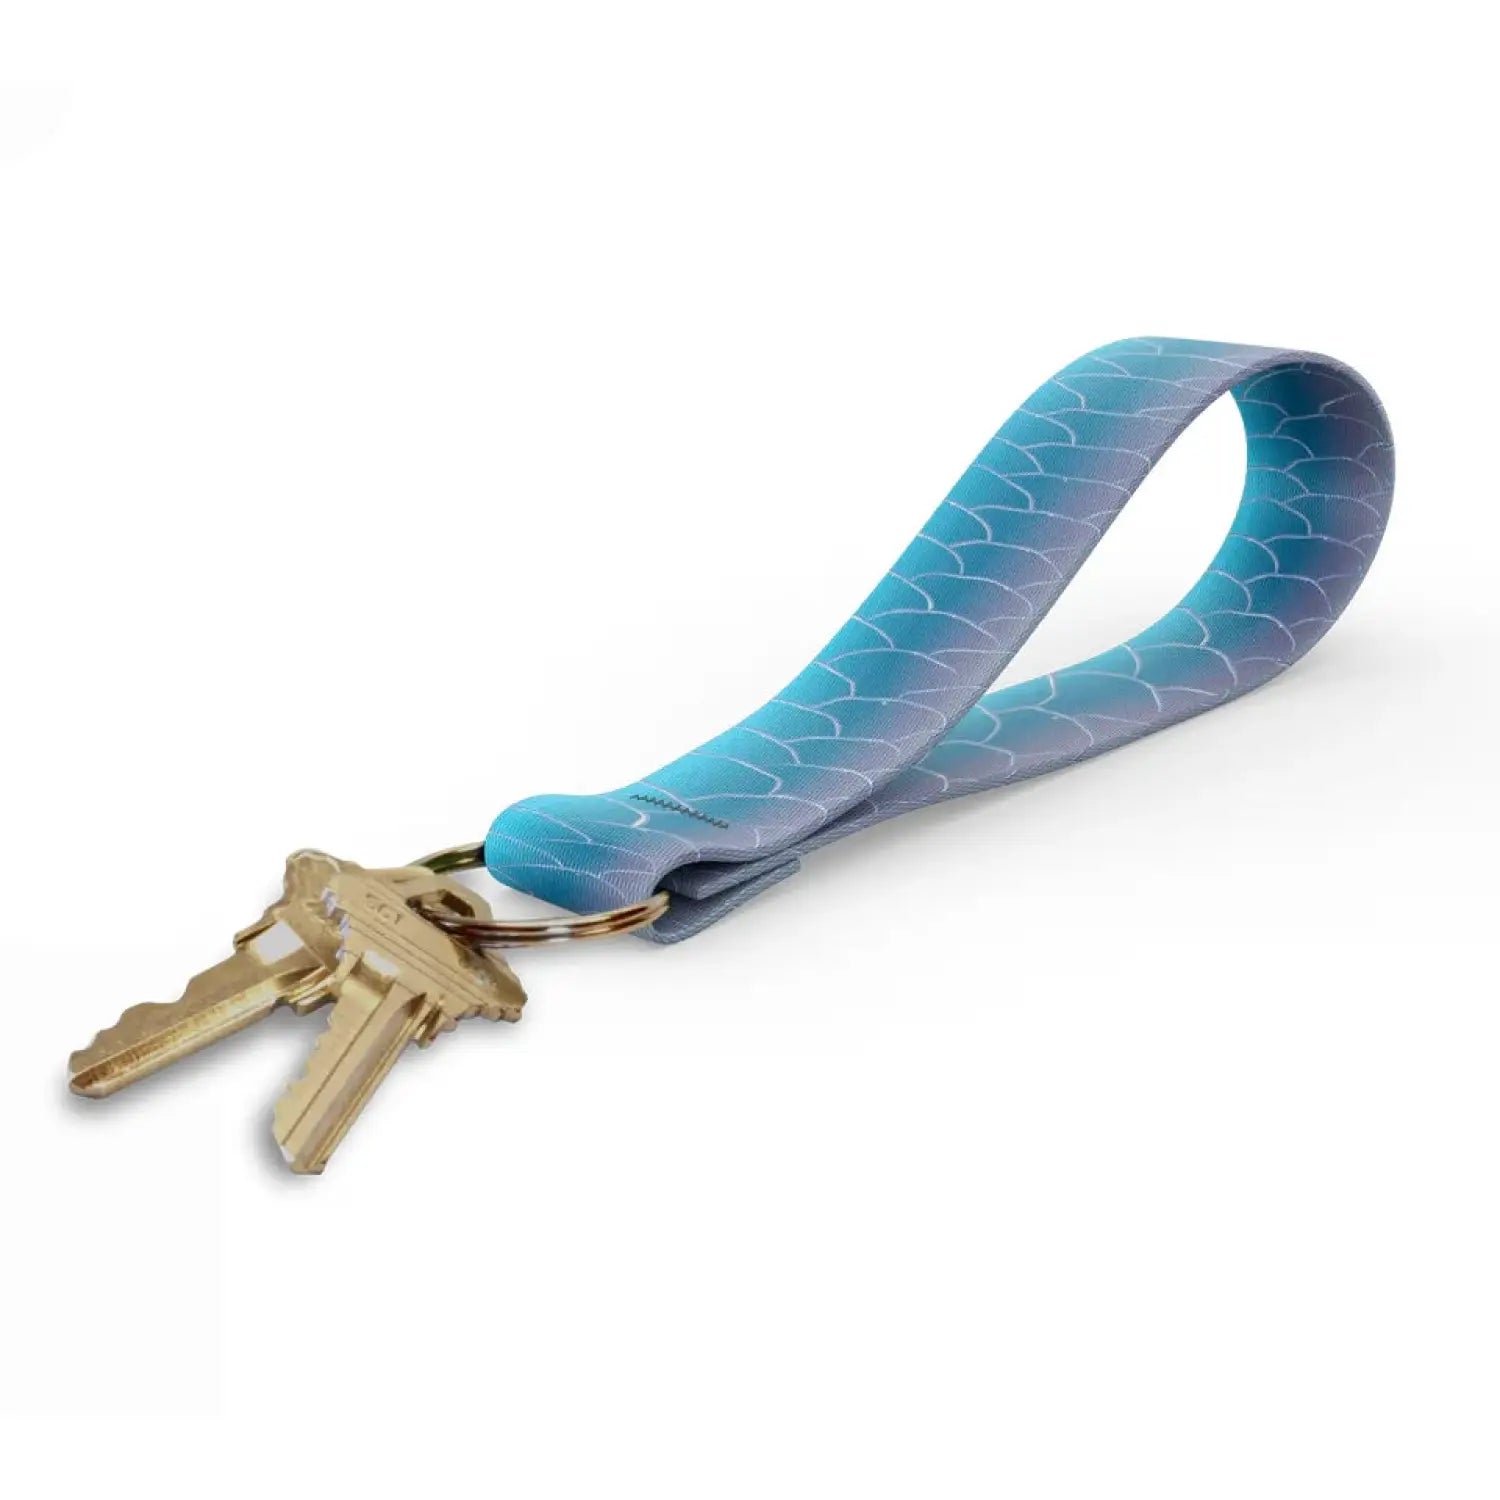 Wingo Key Fob in Tarpon design. Blue and purple scale colors shown with metal ring and keys.